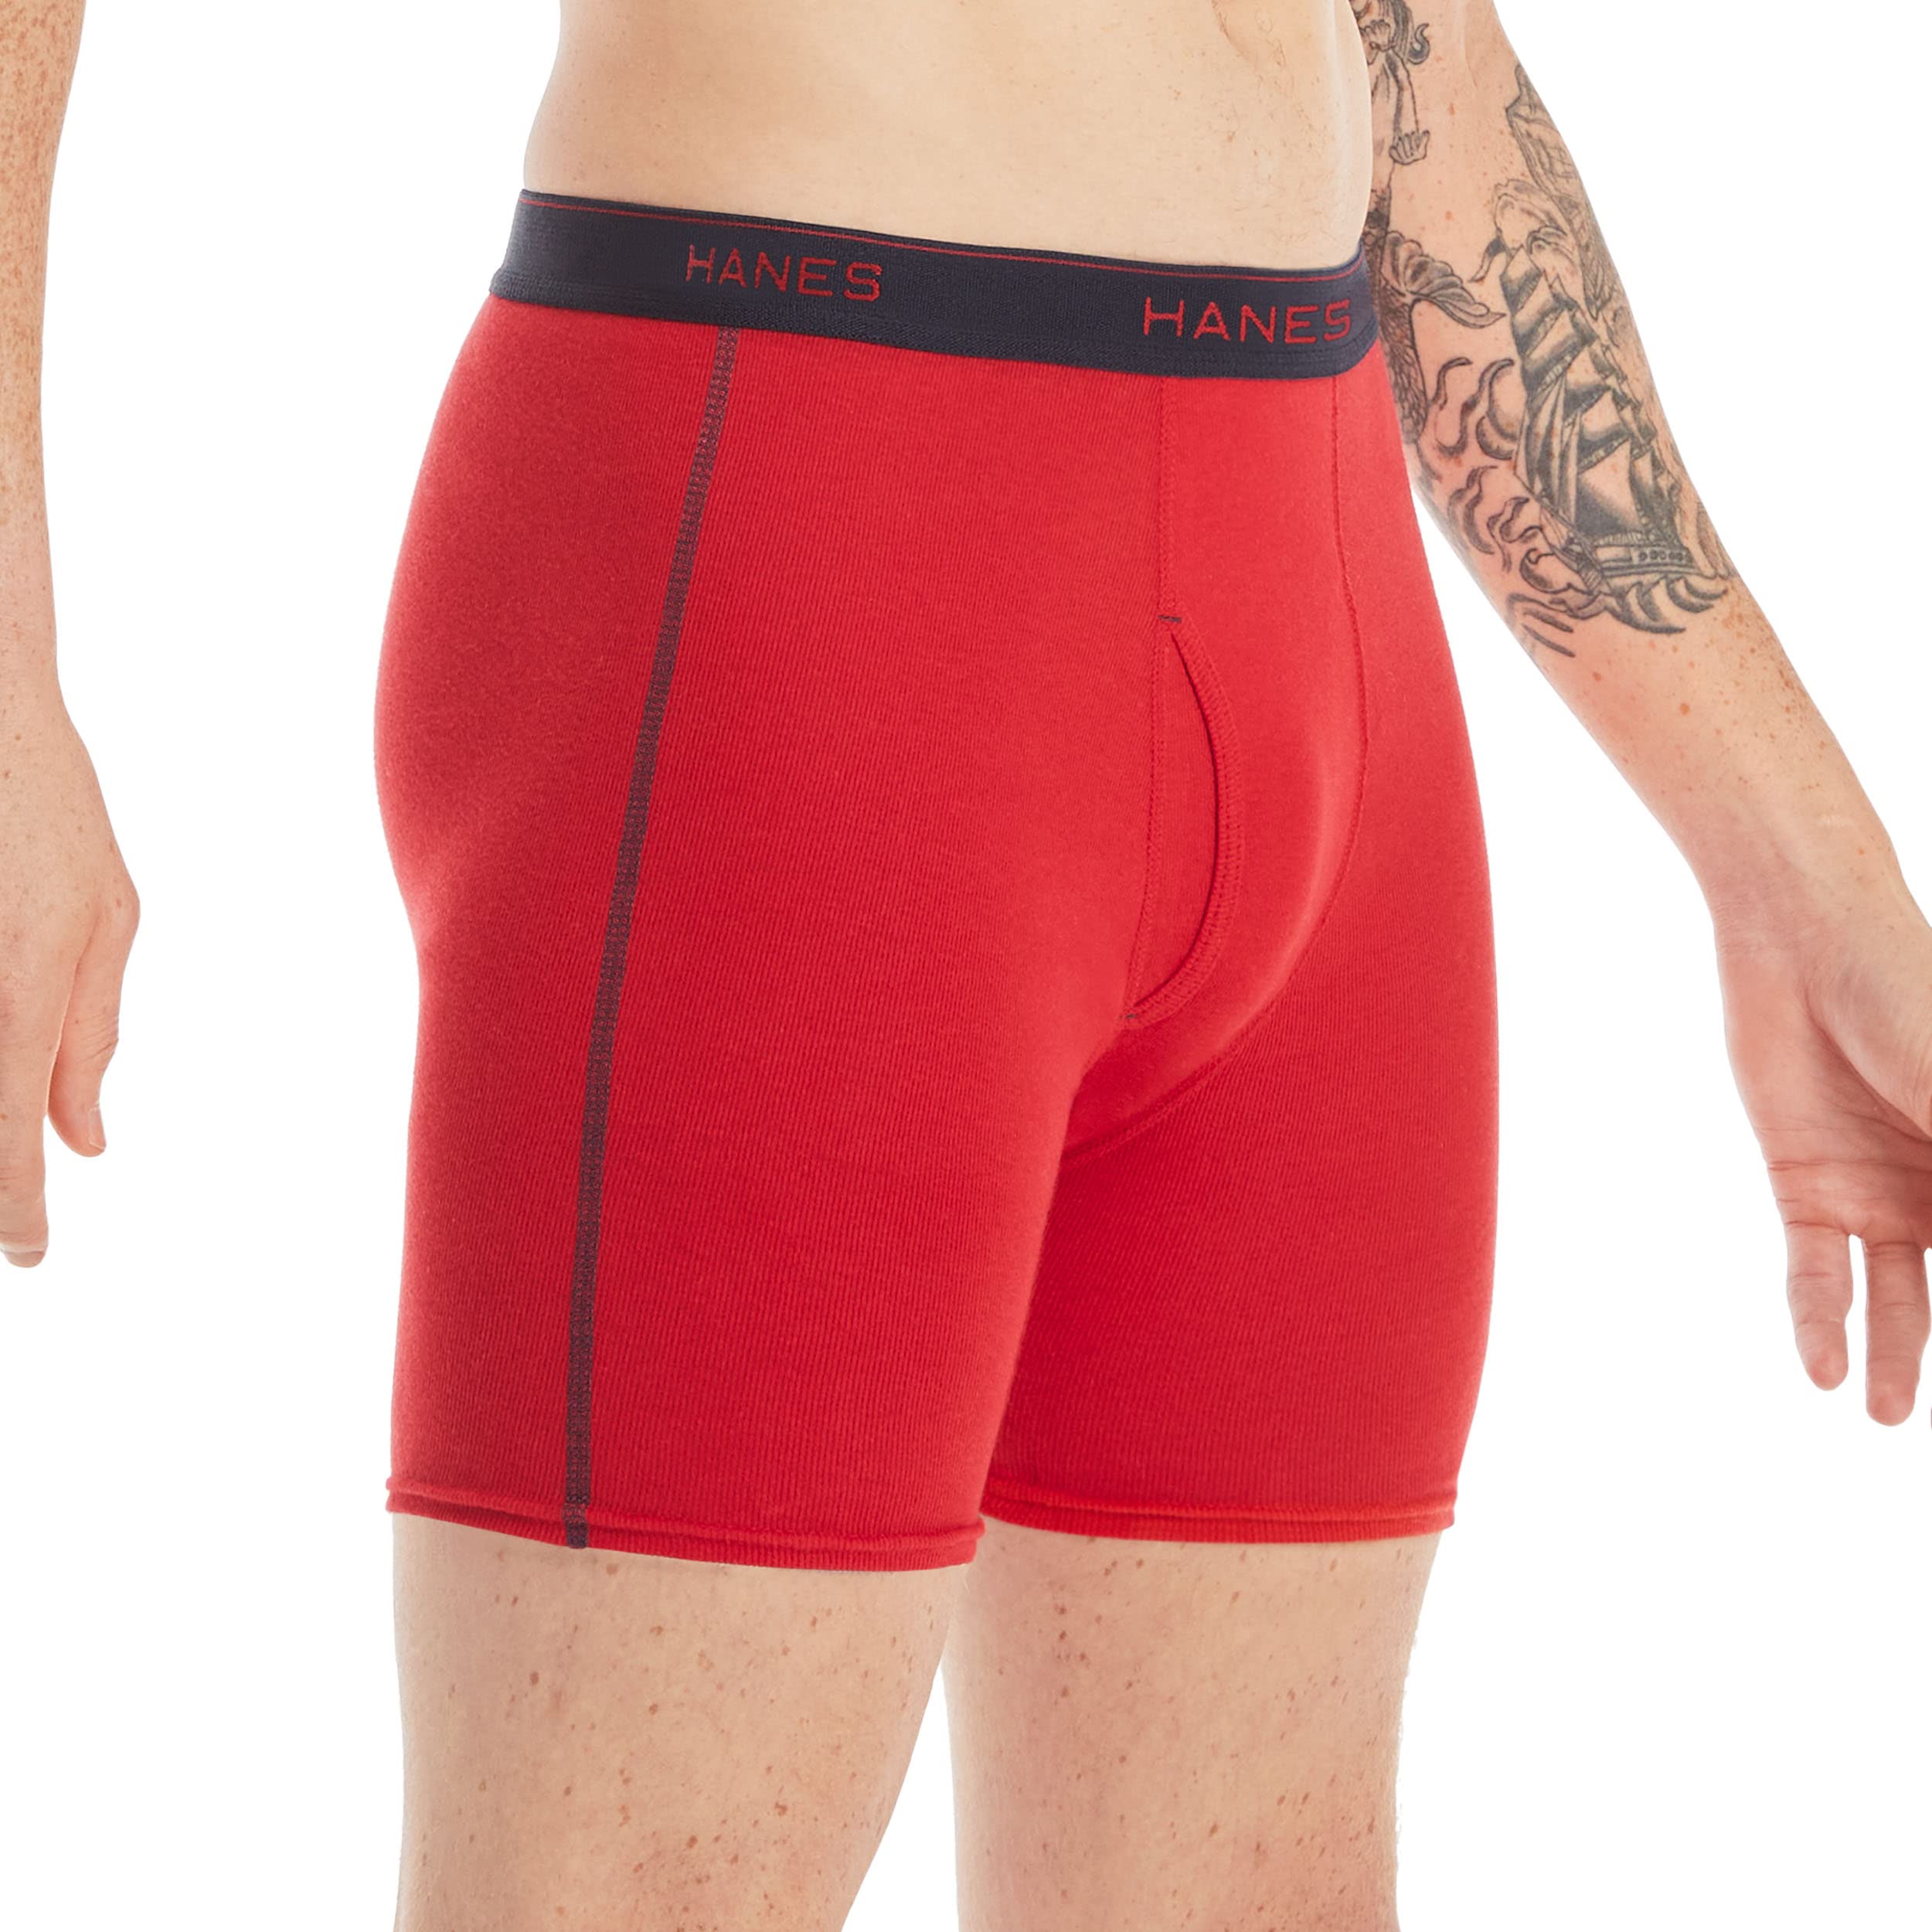 Buy Hanes Boxer Briefs, Cool Dri Moisture-Wicking Underwear, Cotton  No-Ride-up for Men, Multi-Packs Available